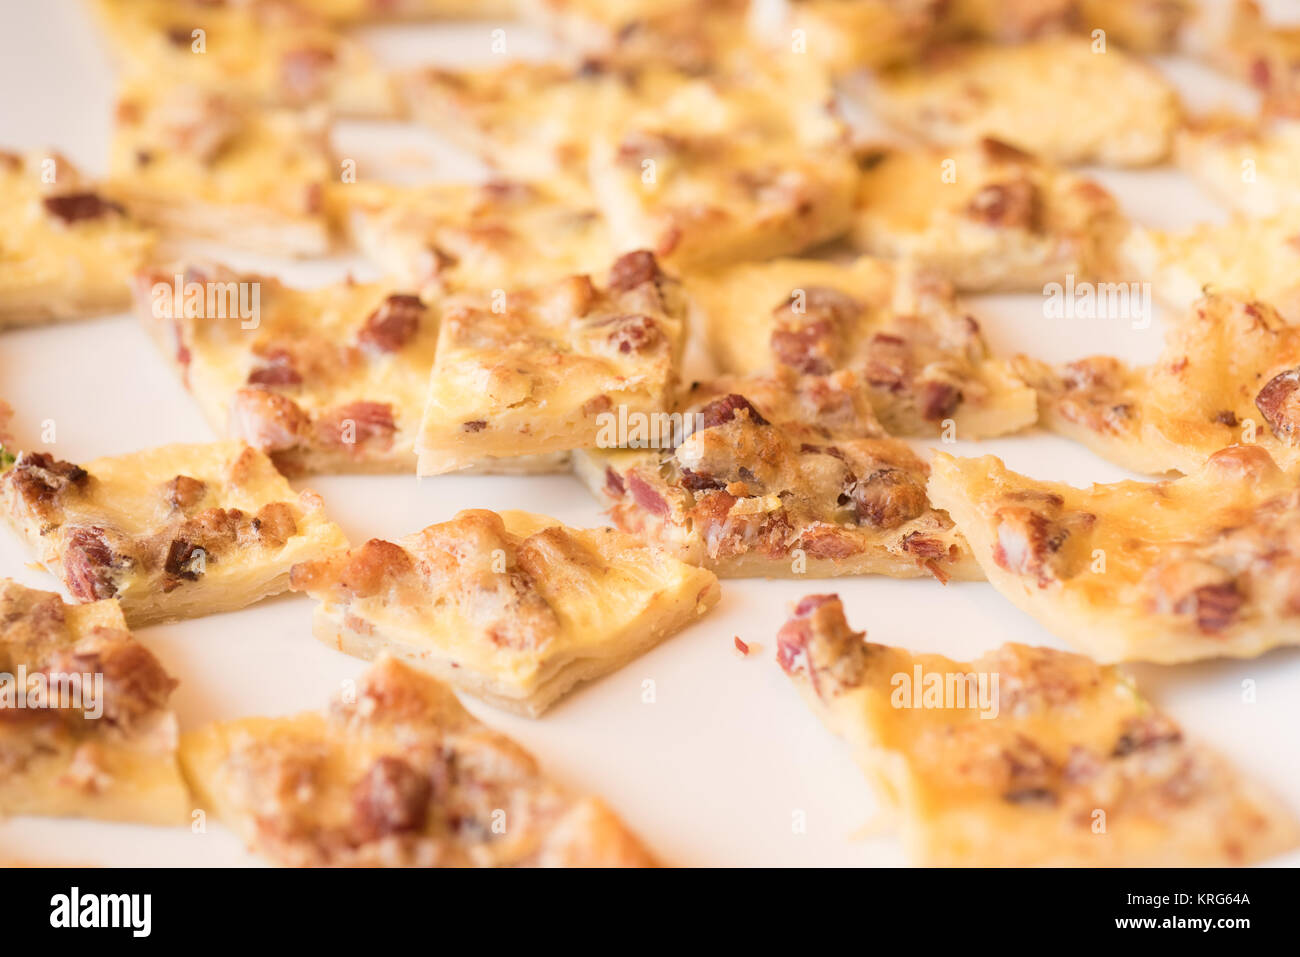 Egg tart with bacon on a plate Stock Photo